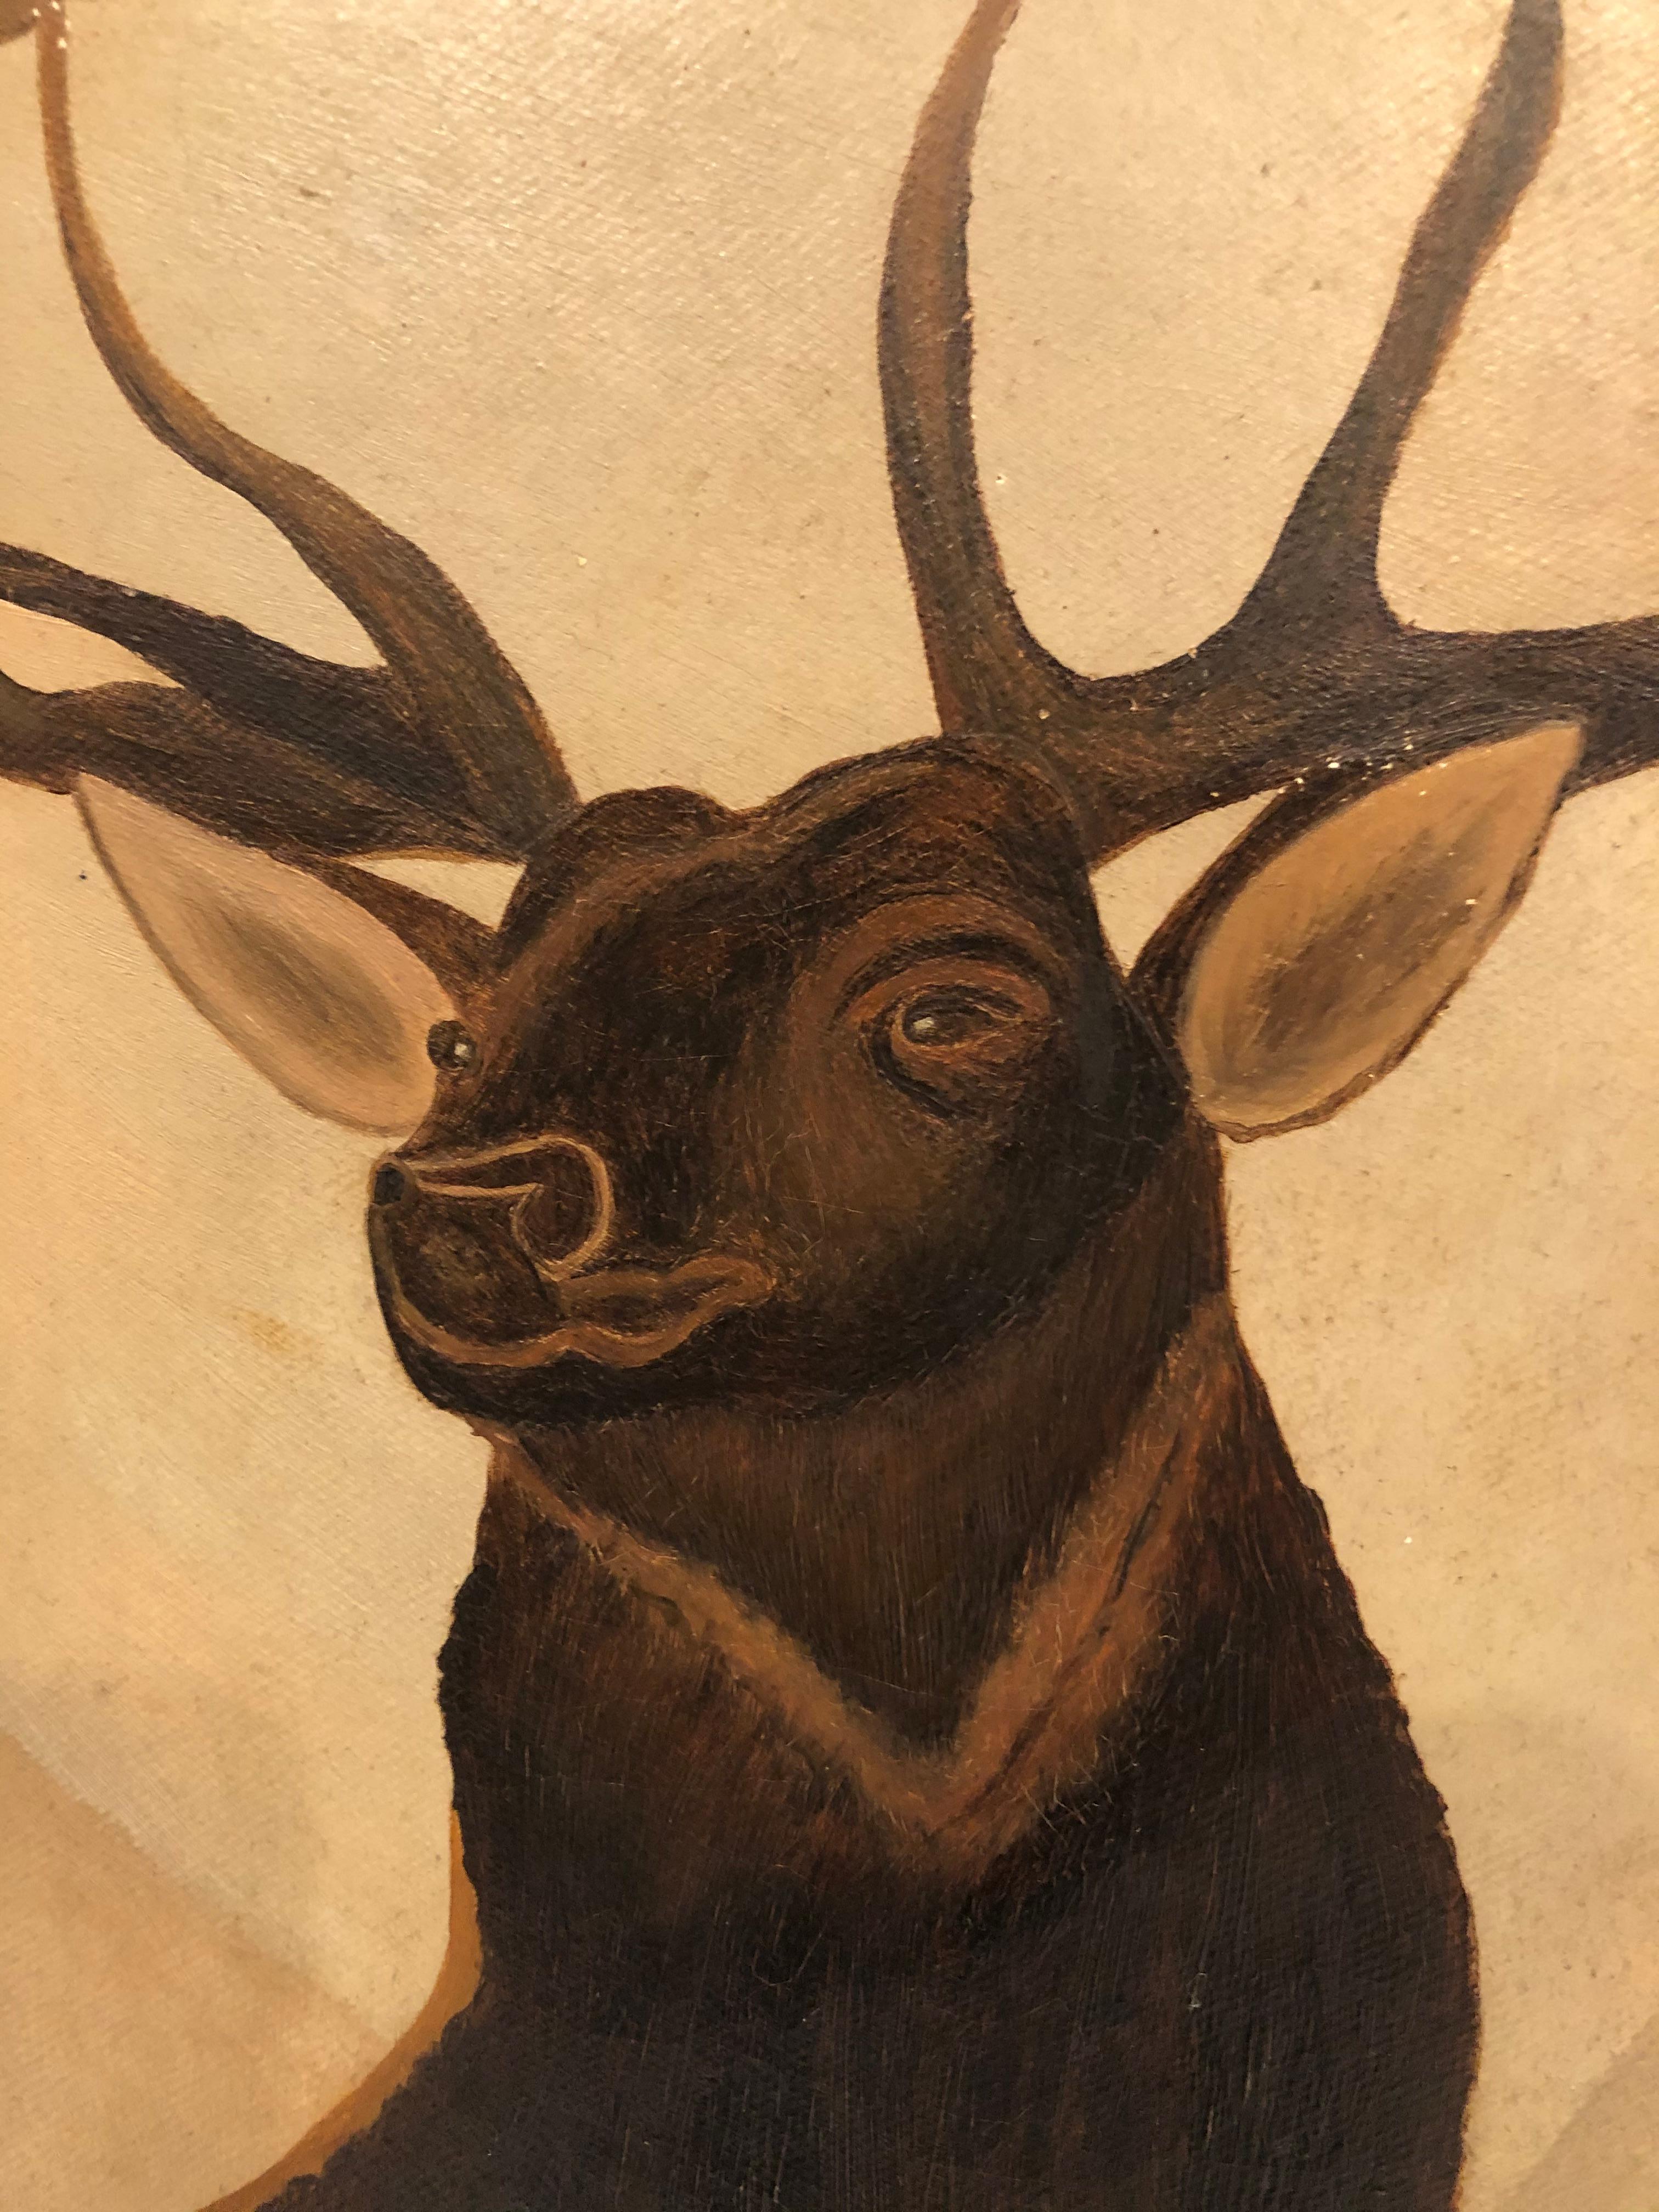 Handsome masculine painting from the late 19th century of a proud buck deer with huge antlers striking an imposing pose. Moody color palette of taupe, grey, brown and mossy green. Signed in pencil on the back, Leslie Maine, but we don't know if that